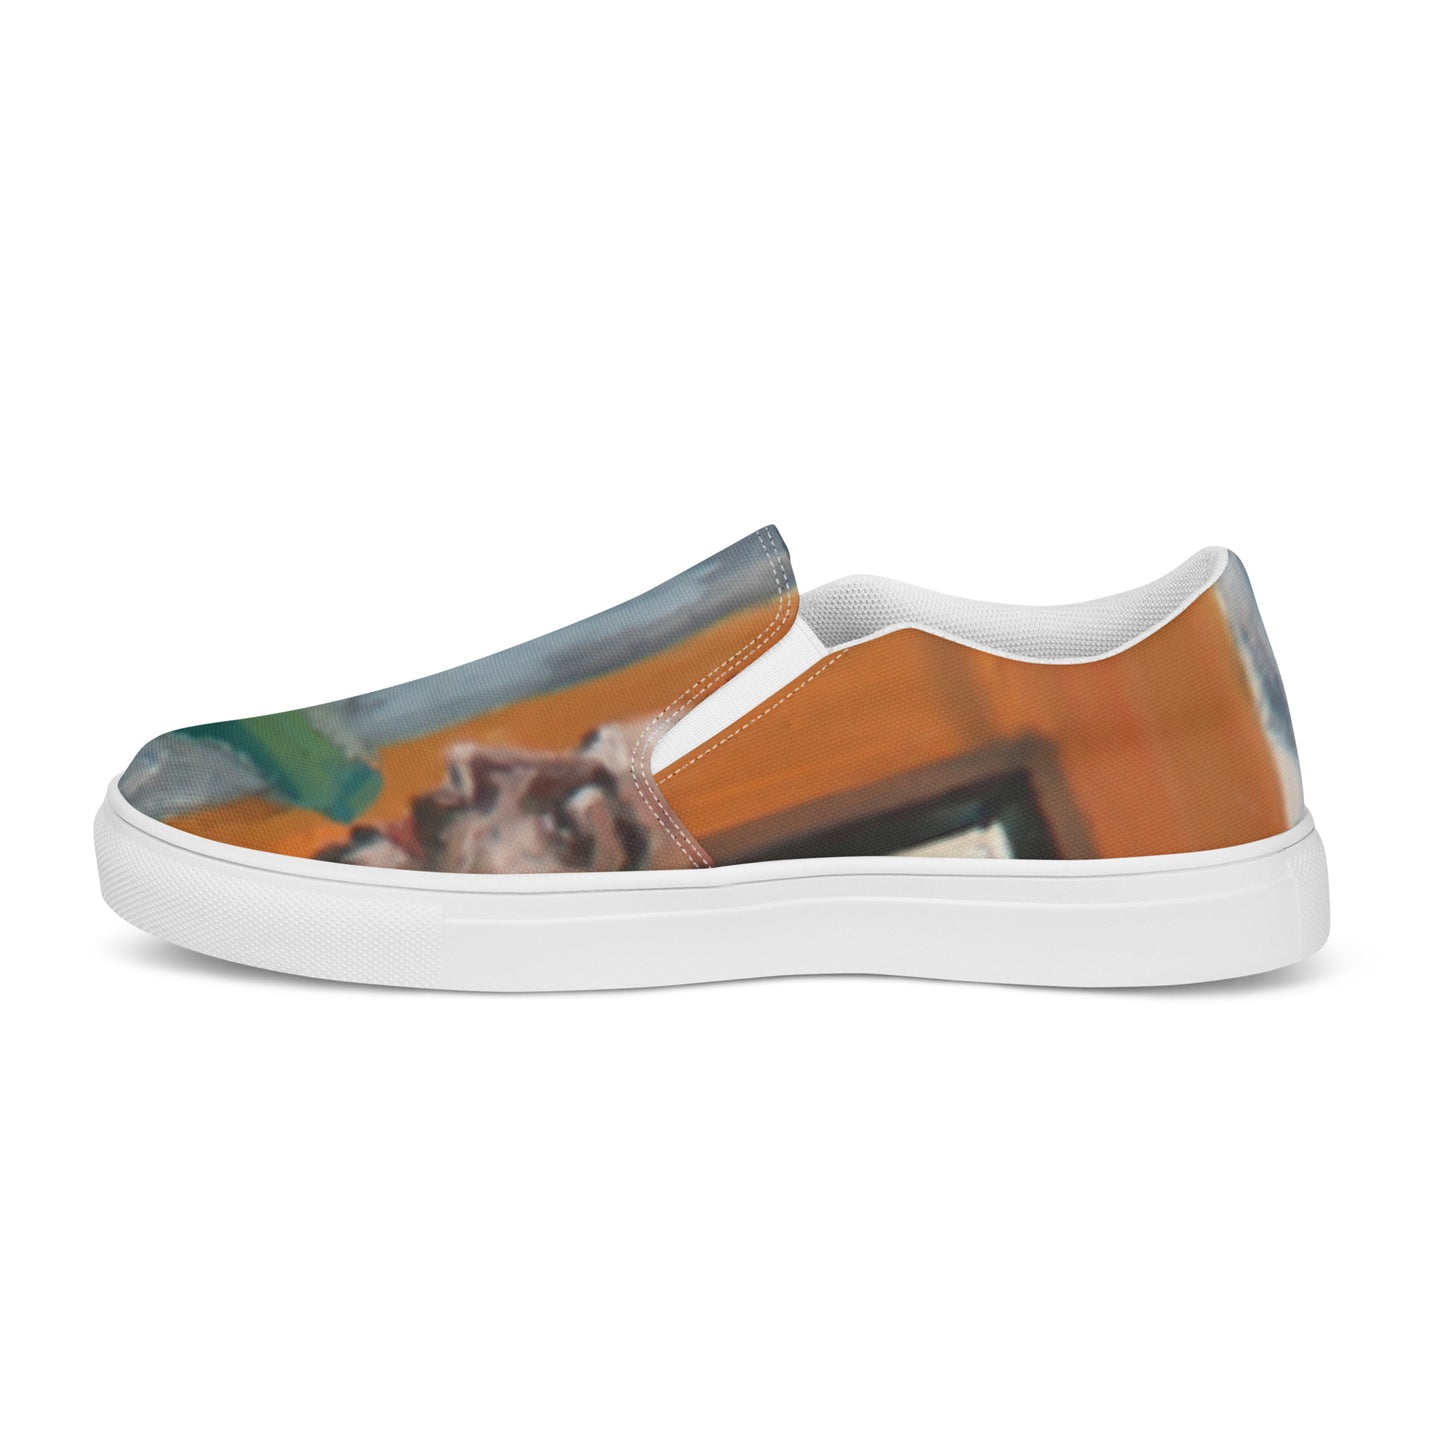 The Couple - Women’s slip-on canvas shoes